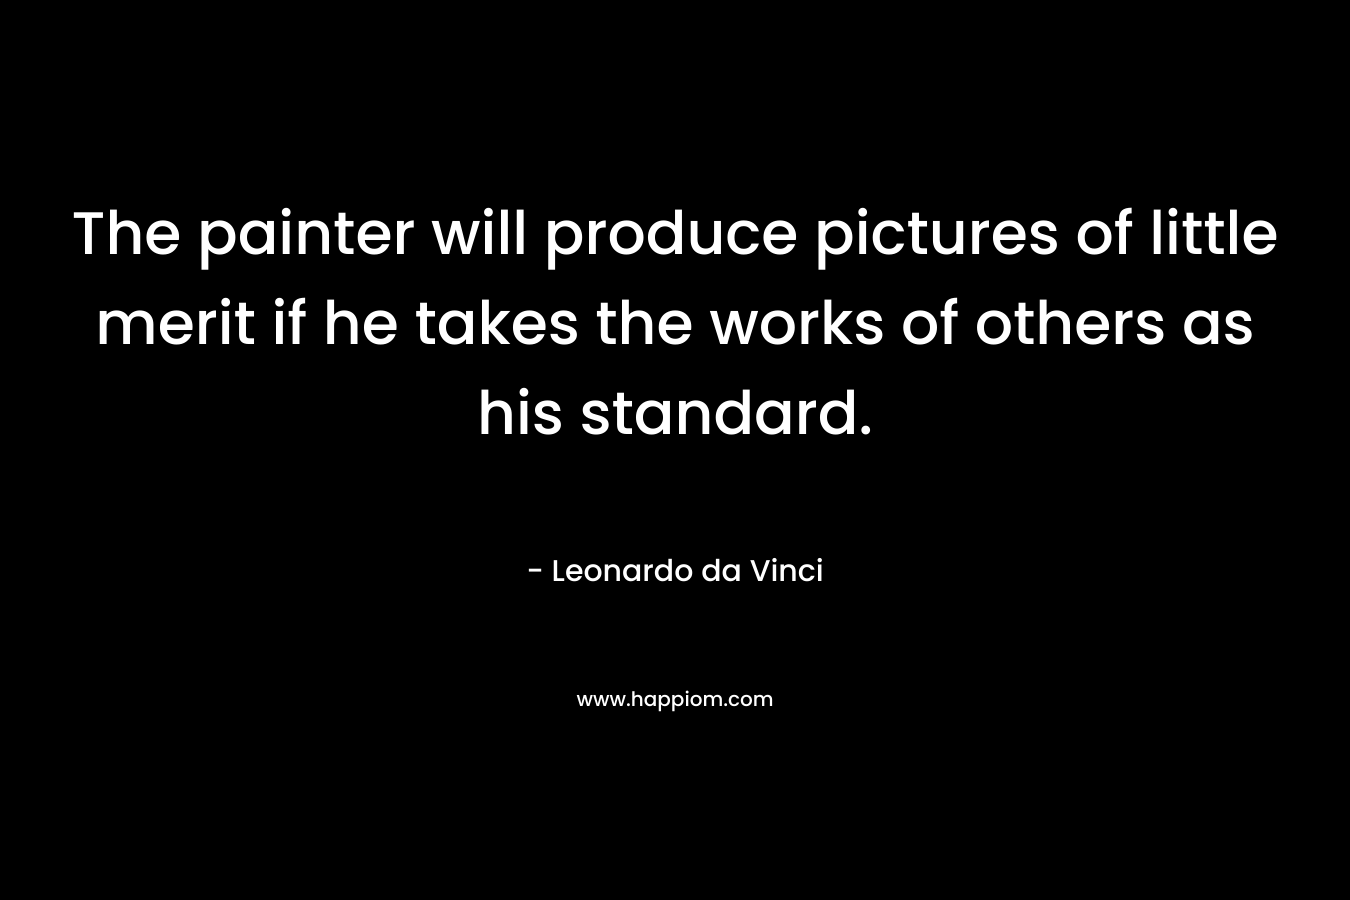 The painter will produce pictures of little merit if he takes the works of others as his standard.